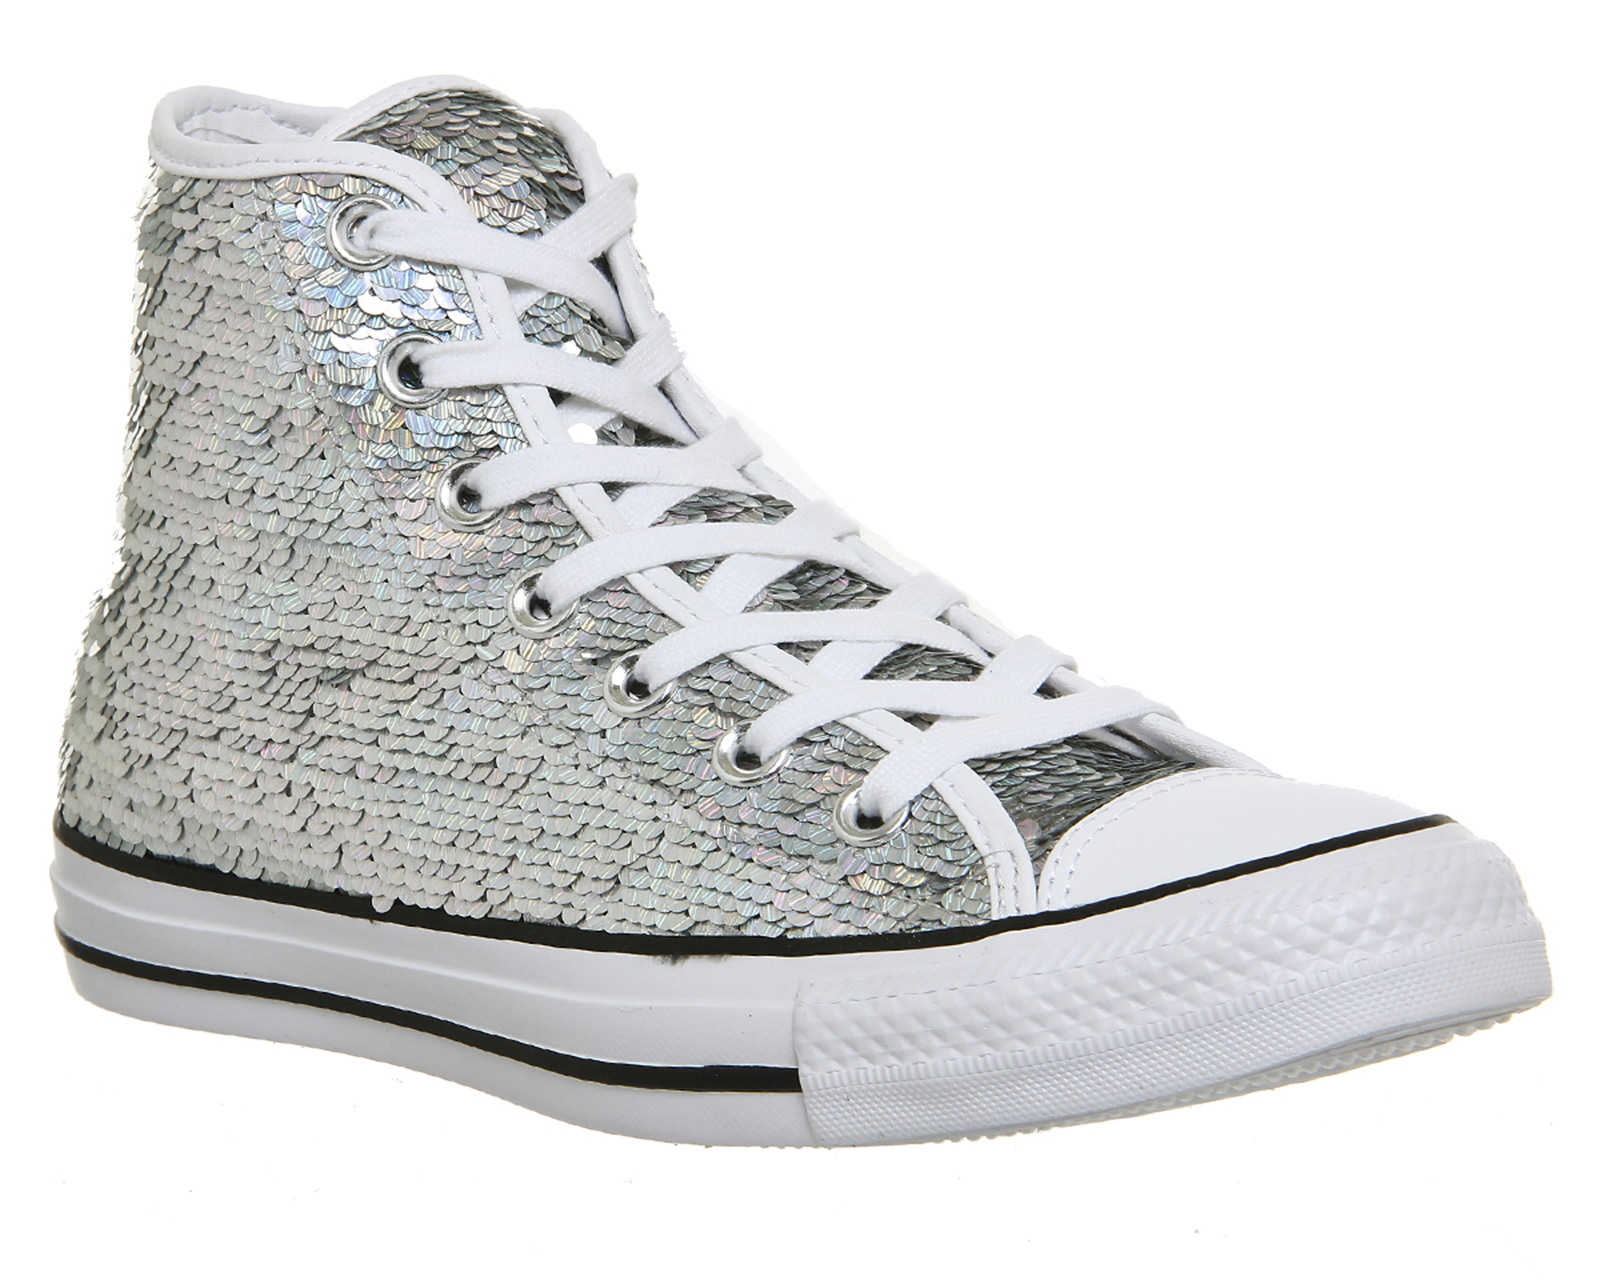 ConverseAll Star Hi TrainersSilver White Sequin